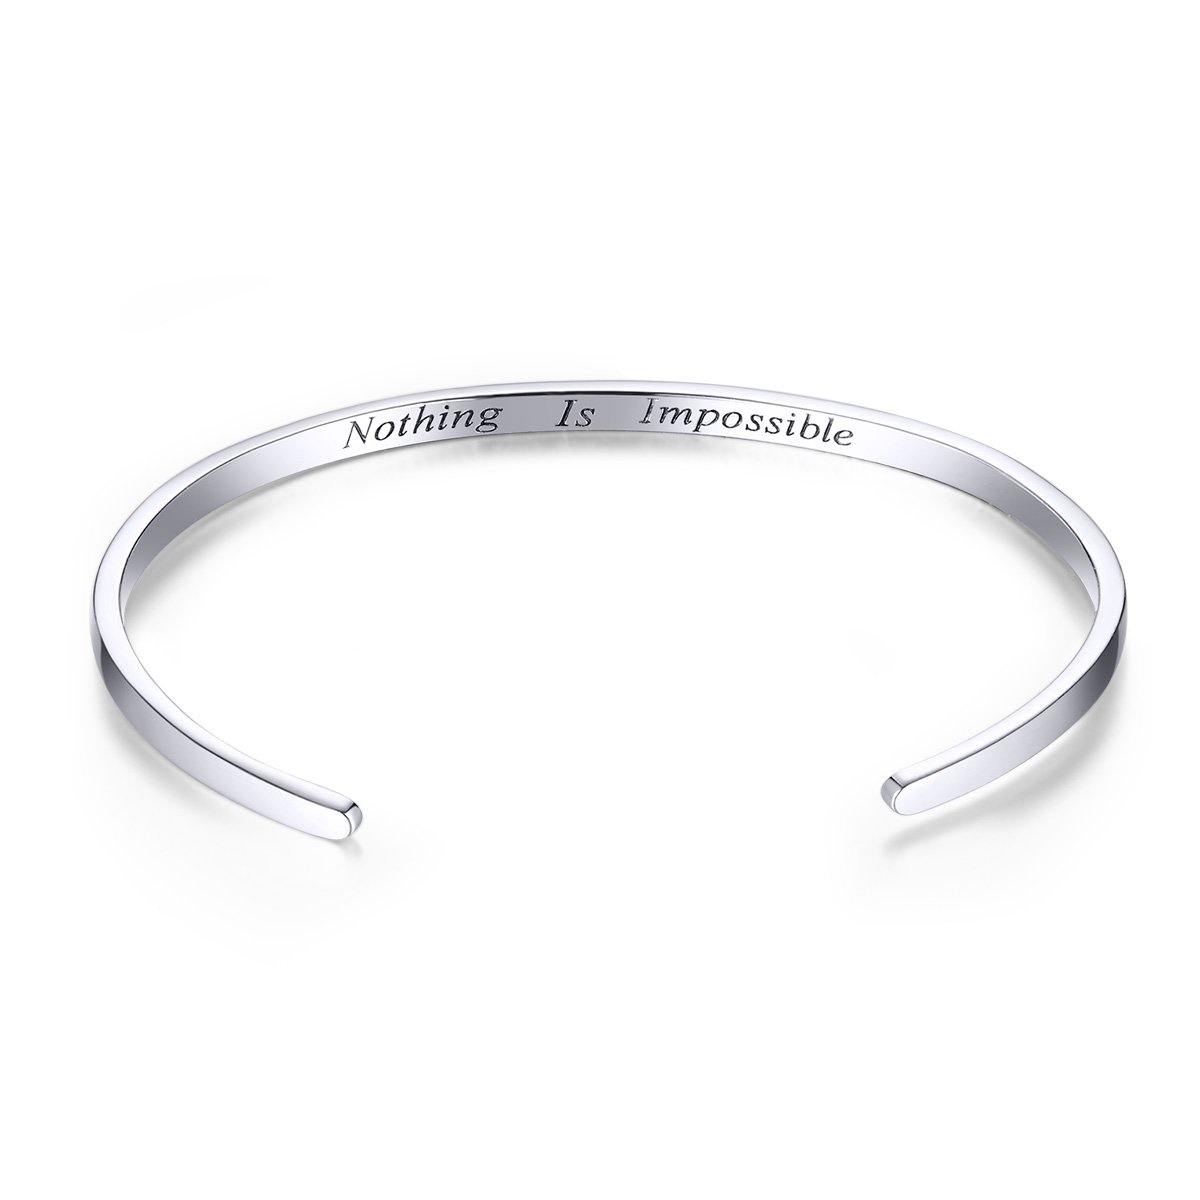 Nothing Is Impossible 925 Sterling Silver Bracelet - Aisllin Jewelry